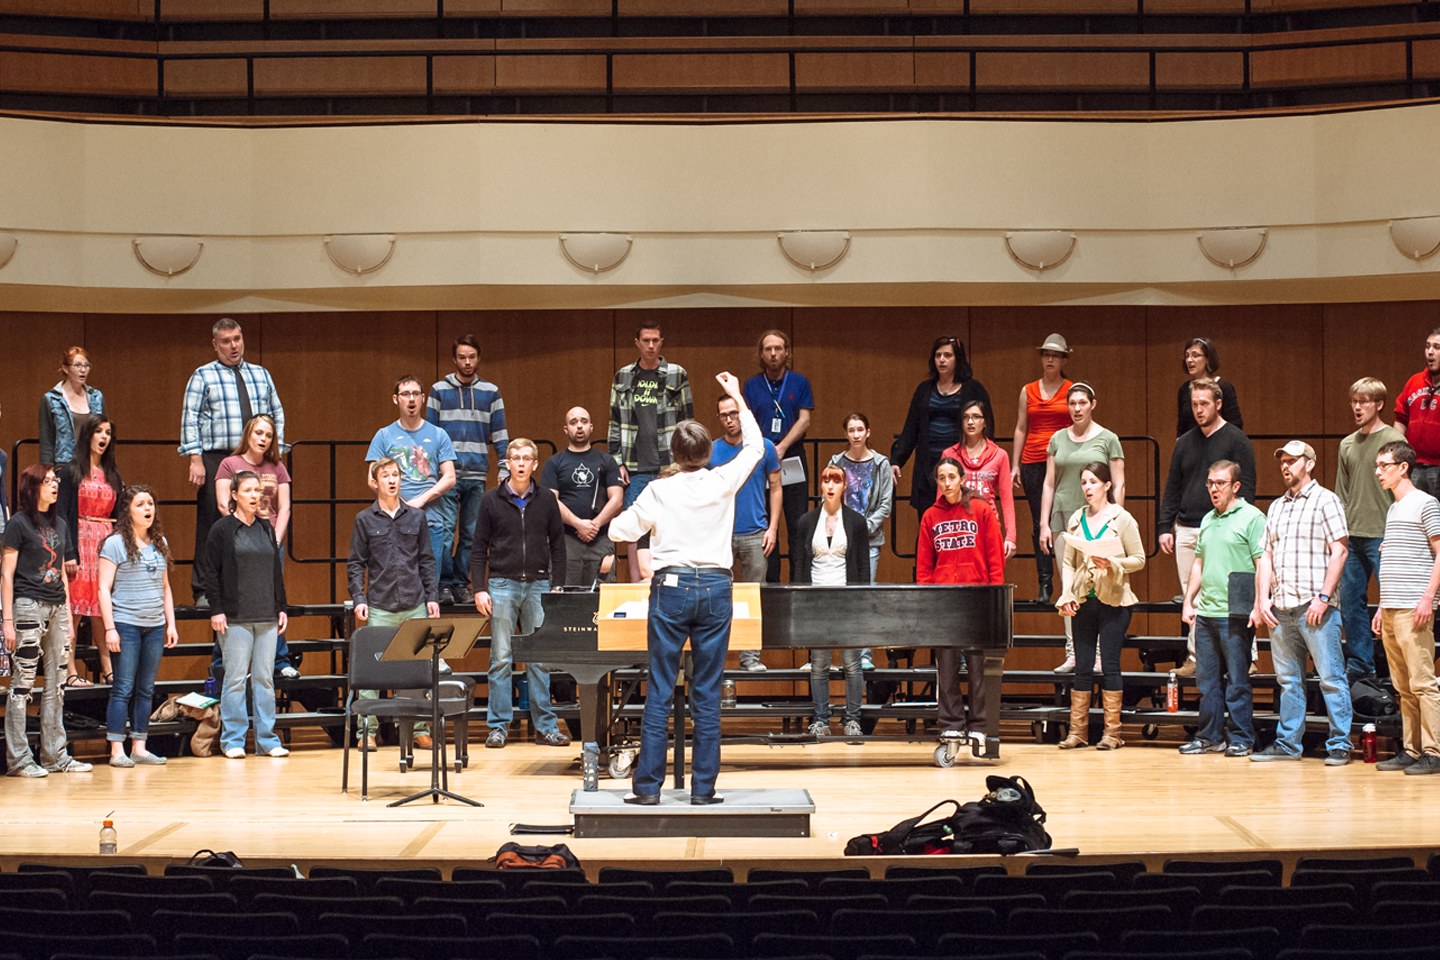 Choral conductor leading a choir rehearsal in the King Center Concert Hall